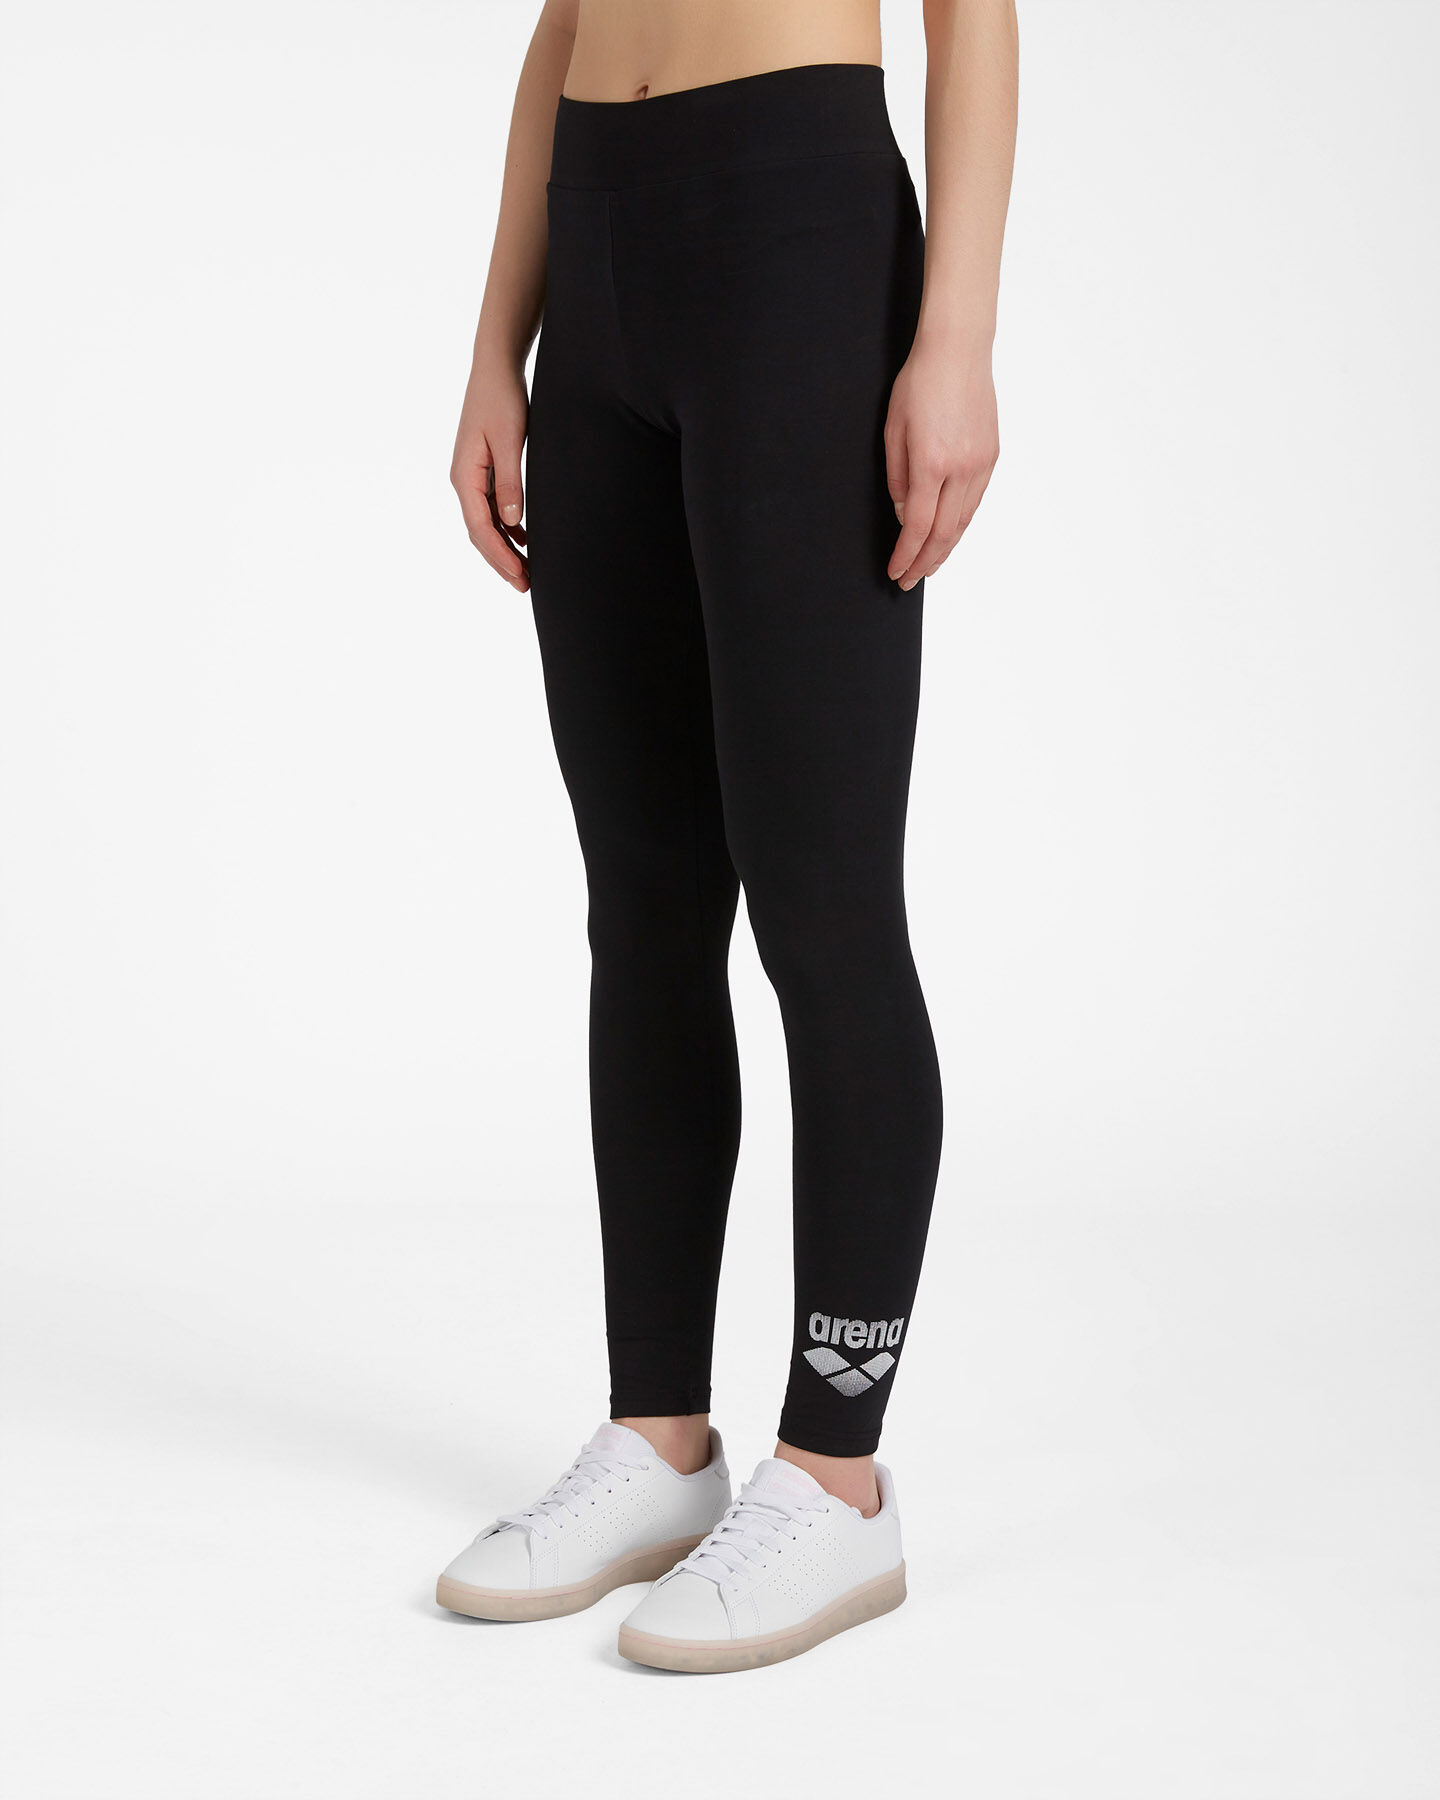  Leggings ARENA JSTRETCH PERFORM W S4087556|050|XS scatto 2